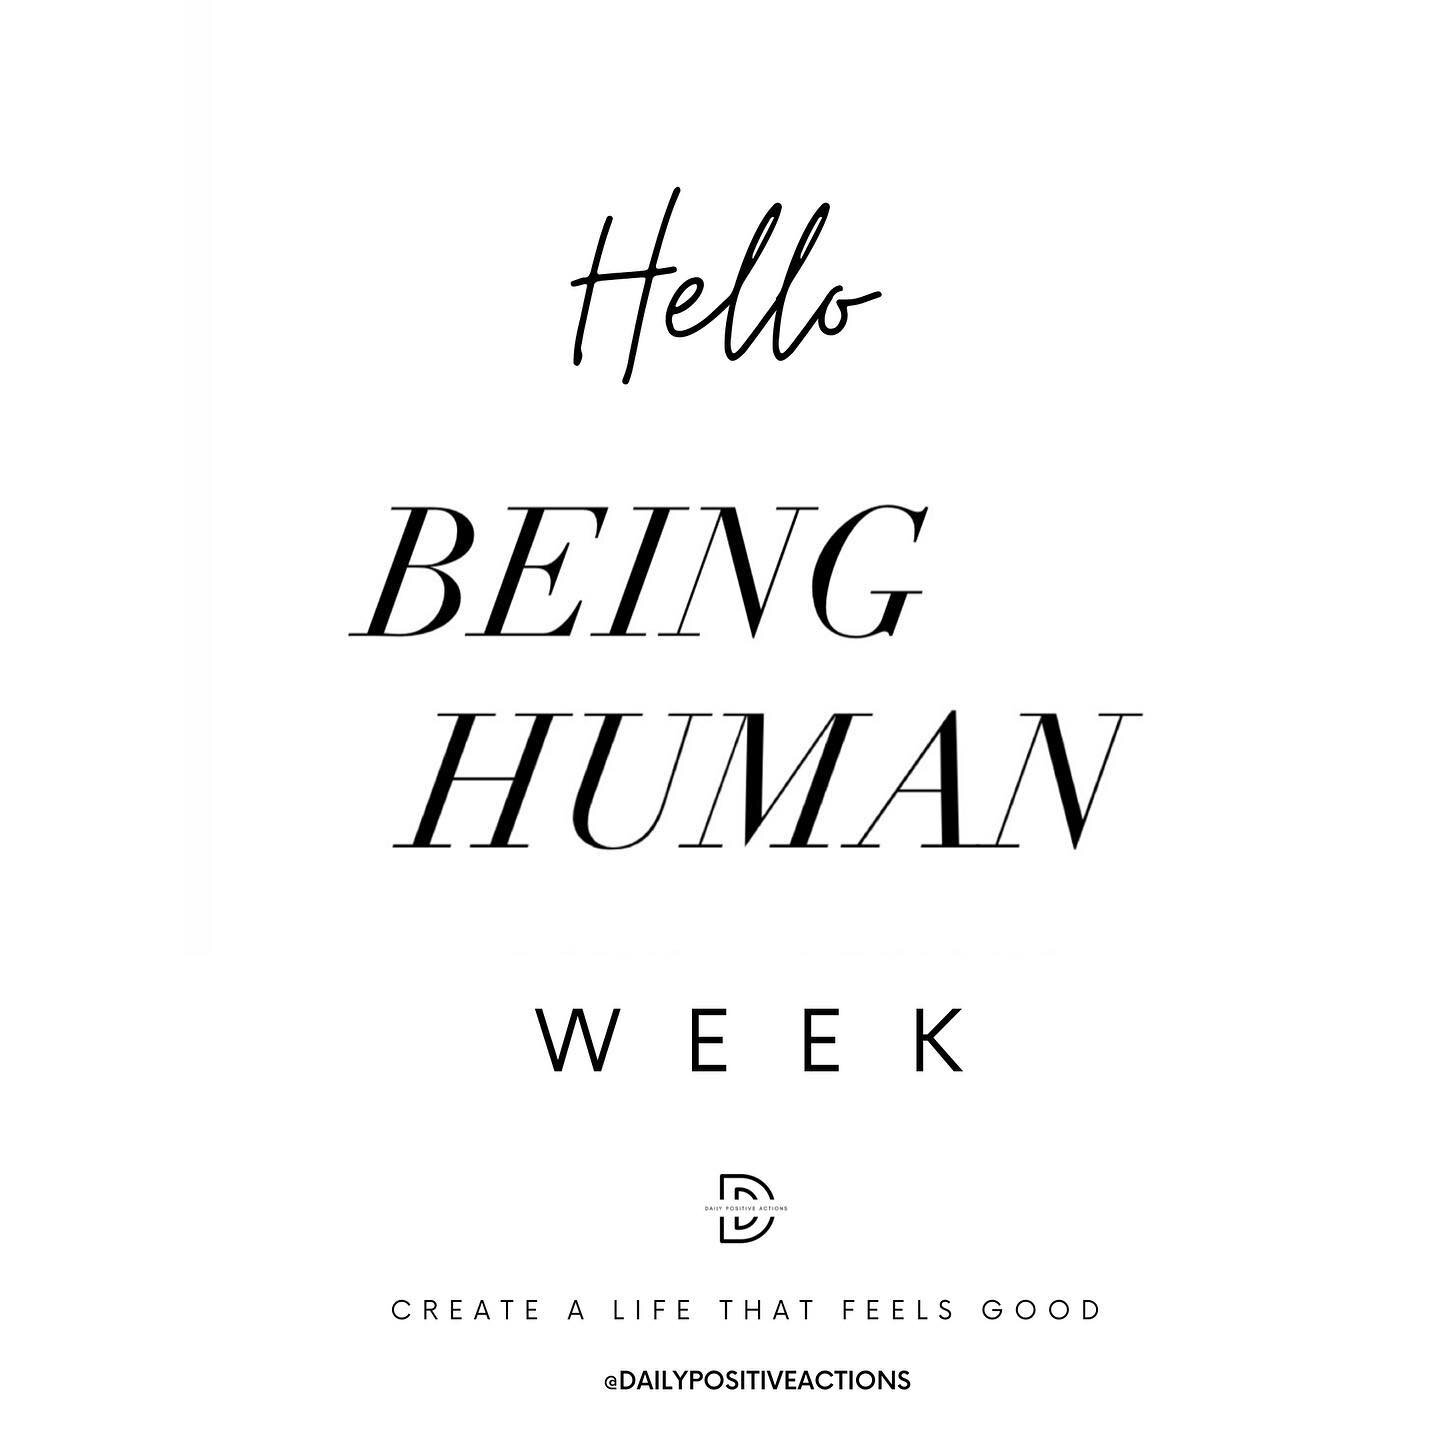 The focus this week has been; + BEING HUMAN; We have been exploring &amp; discussing;

+ Mental Health awareness week

+ It&rsquo;s okay. You are human

+ The power of sharing or hearing someone&rsquo;s whole story.

+ The courage in vulnerability 

